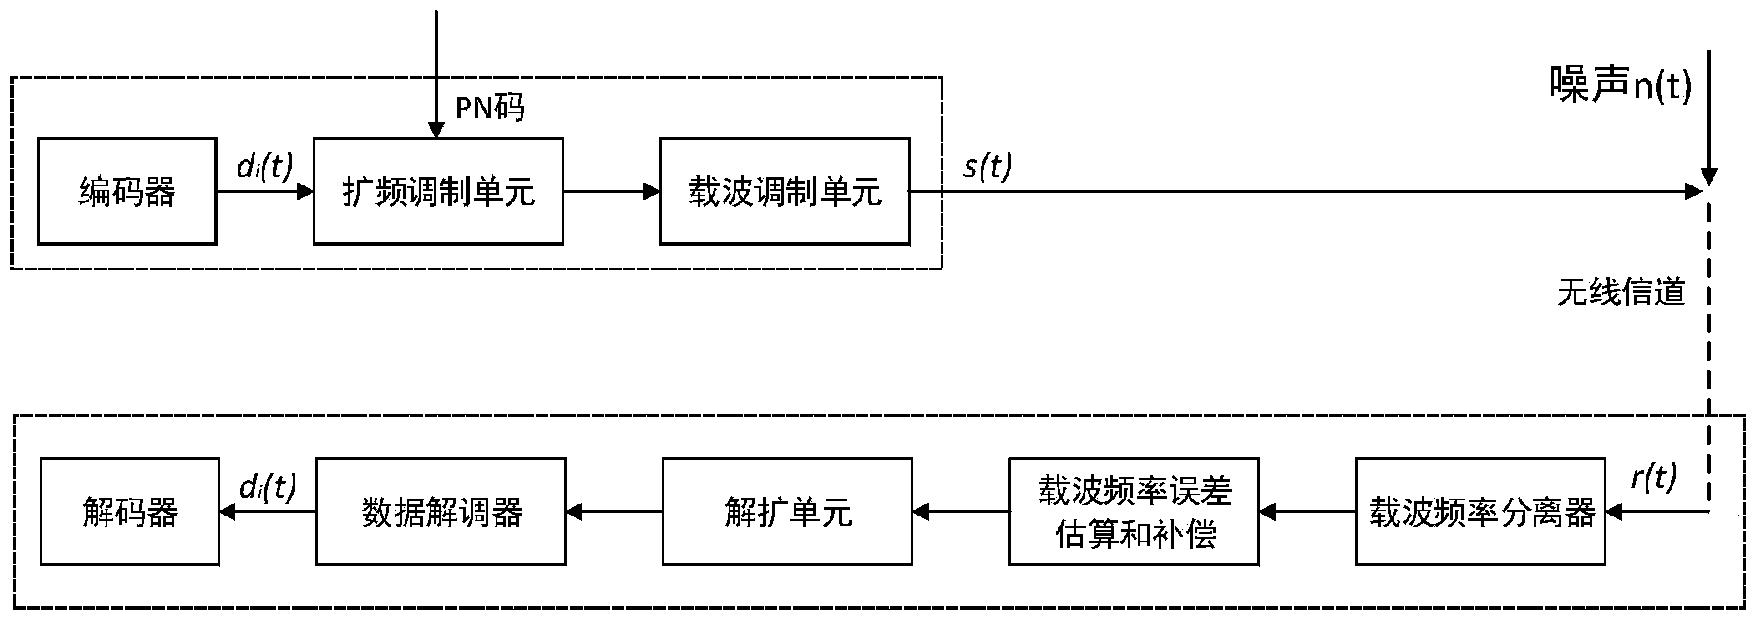 Carrier frequency error estimation and compensation system and method of multi-carrier spread spectrum communication